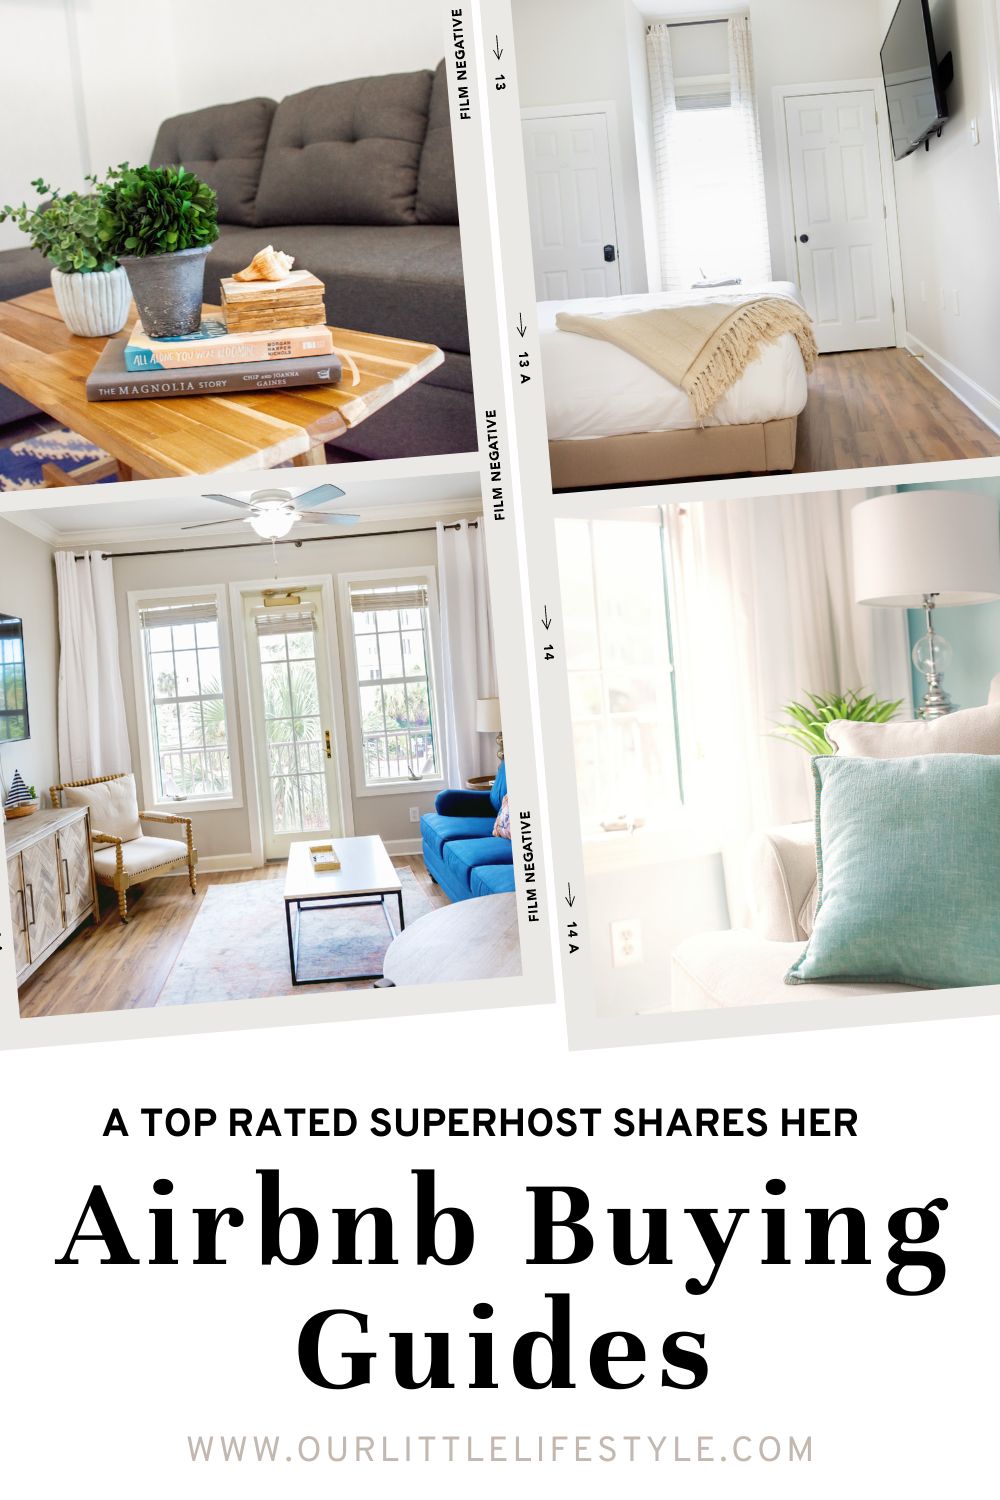 Airbnb Buying Guide